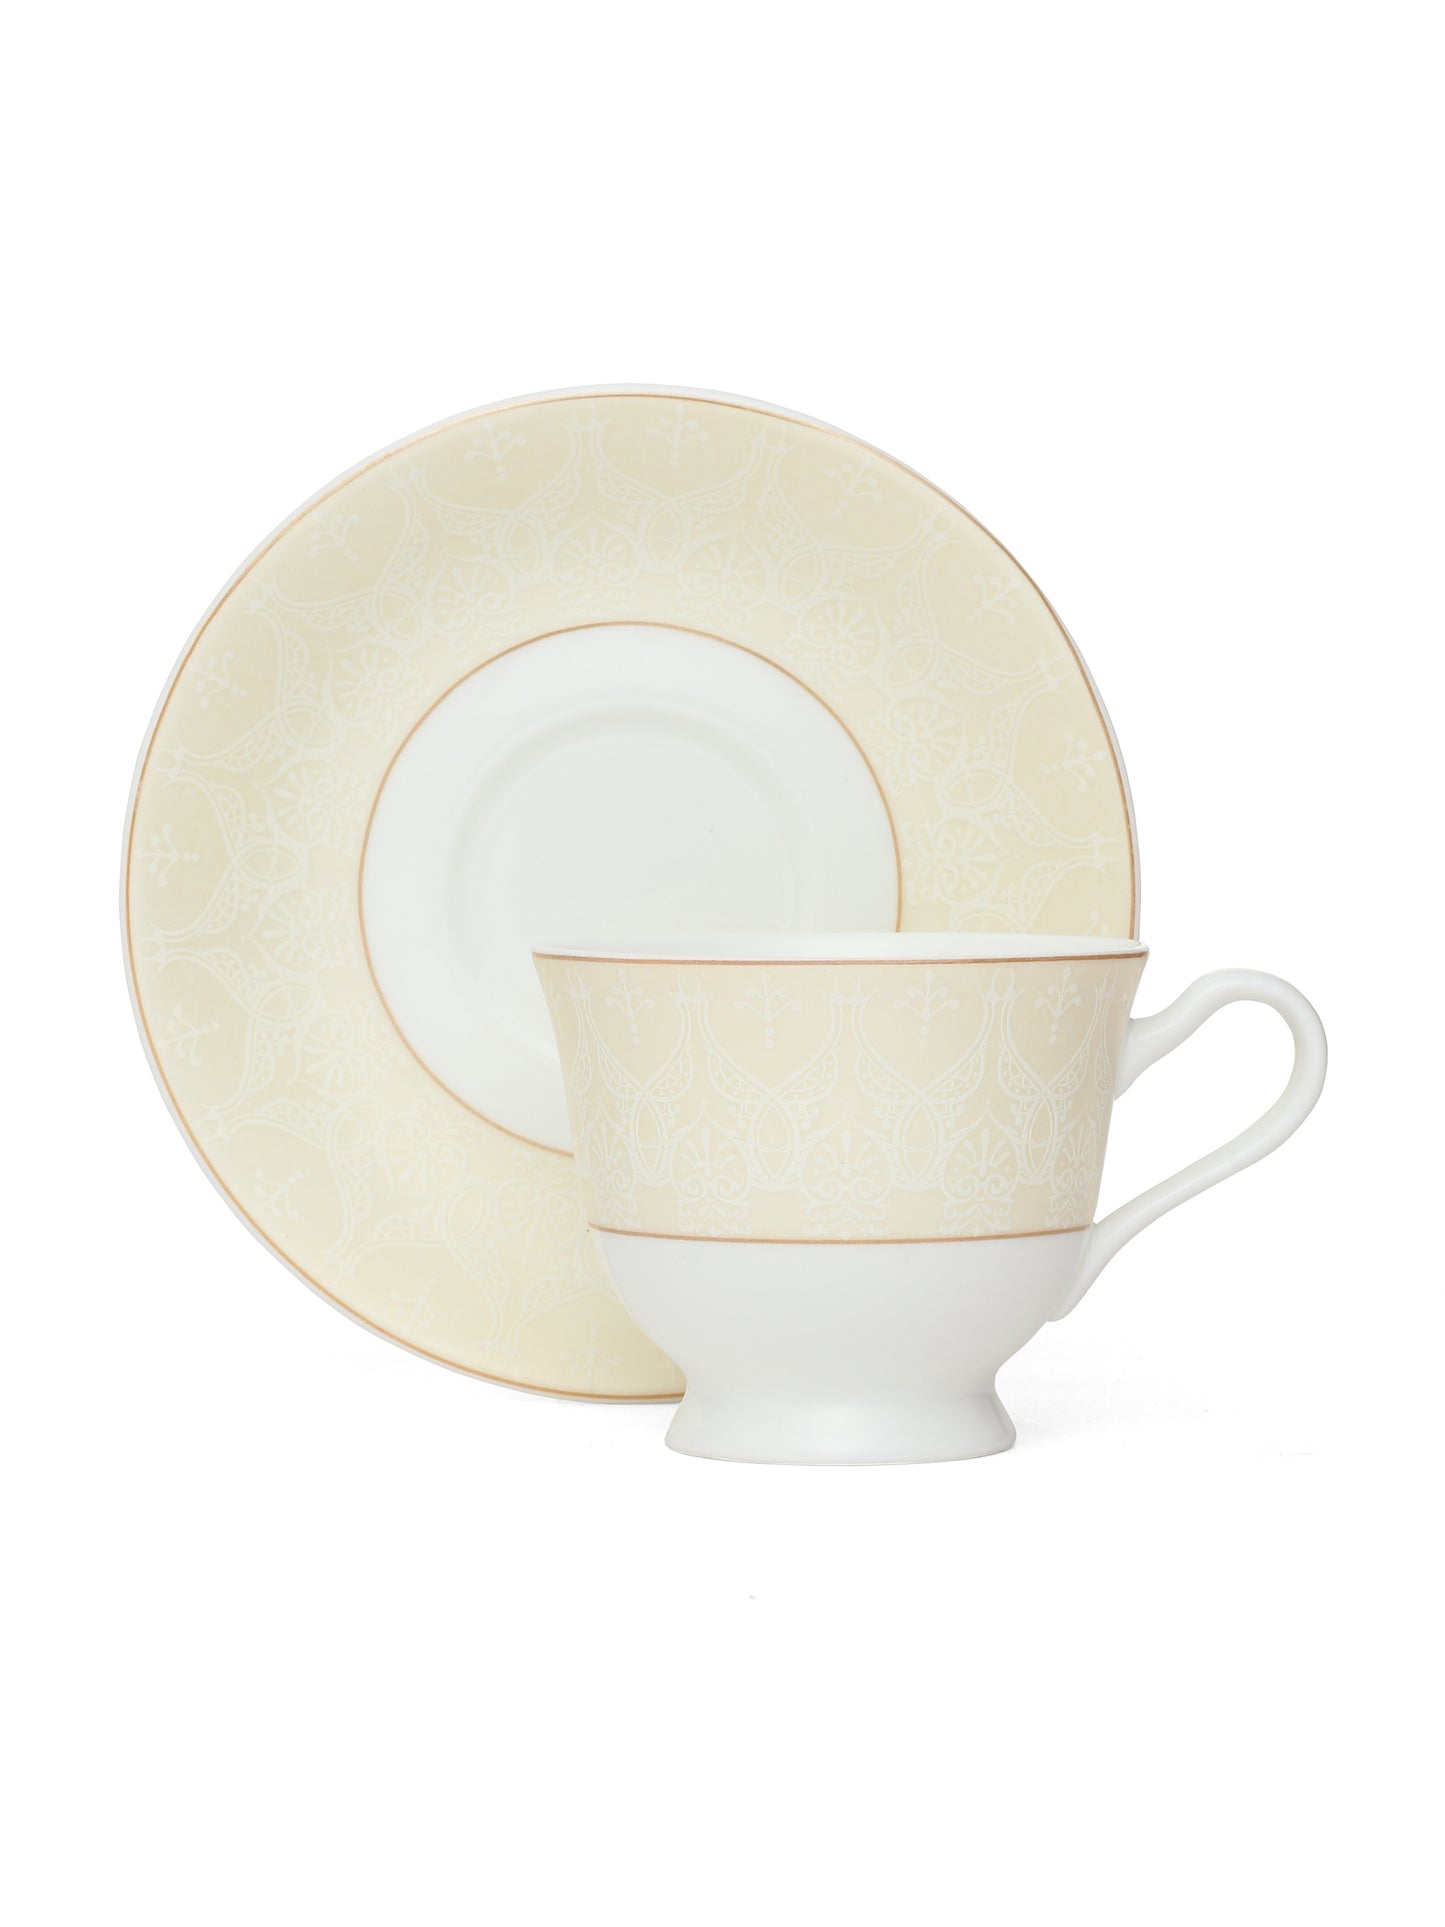 New Georgian Super Cup & Saucer Sets of 12 (6+6) (S305C) - Clay Craft India